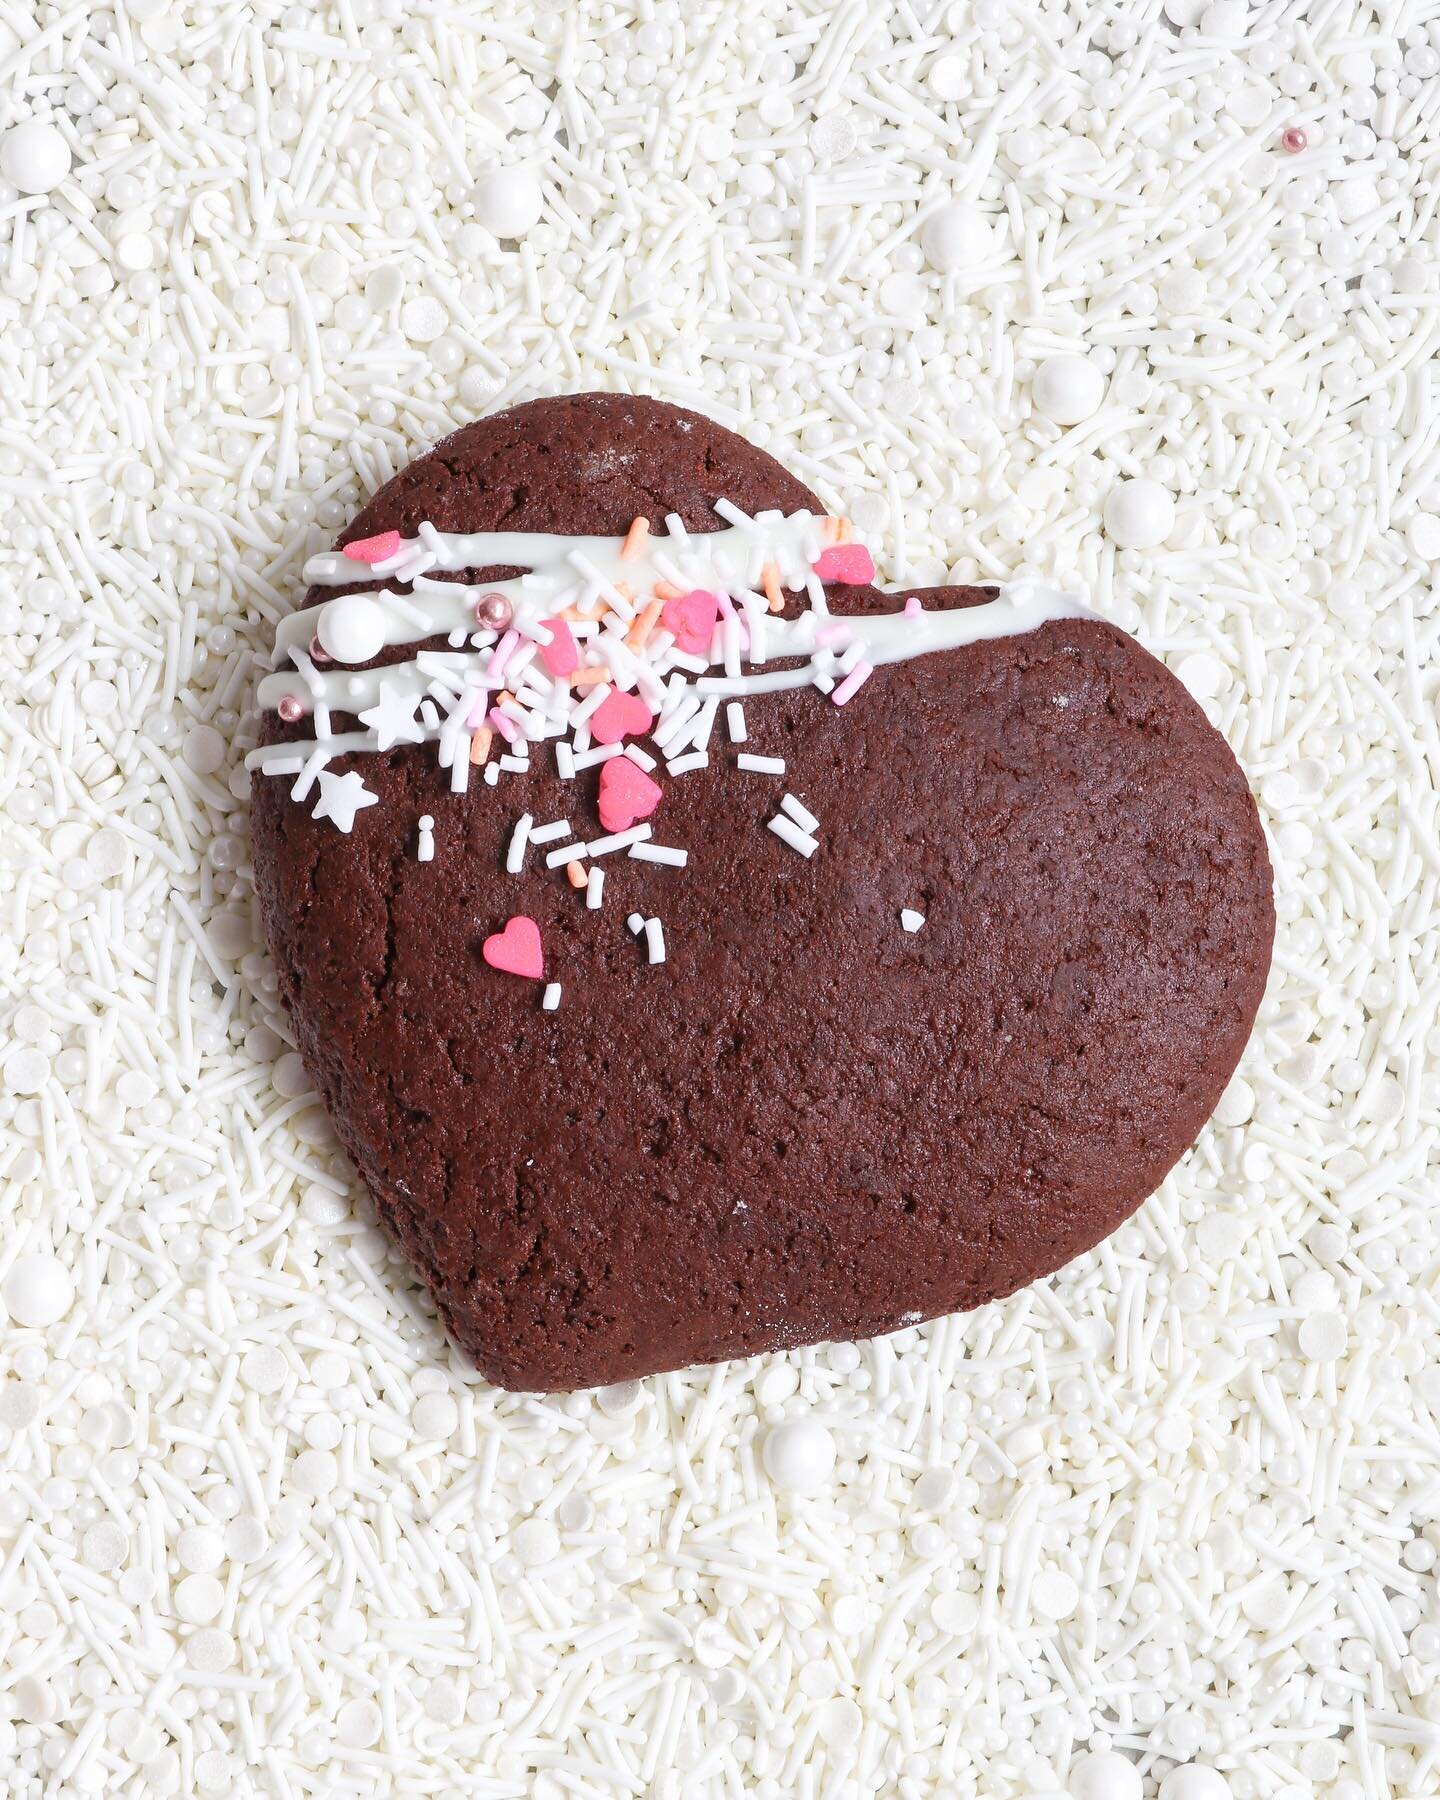 Start your Valentine&rsquo;s Day off right by sharing a &ldquo;Spicy Love&rdquo; cookie with your sweetheart, created in partnership with @kana.goods! Recipe available at Kanalifestyle.com or check out the link in my bio! 💕 #goodsmadebetter #sponsor